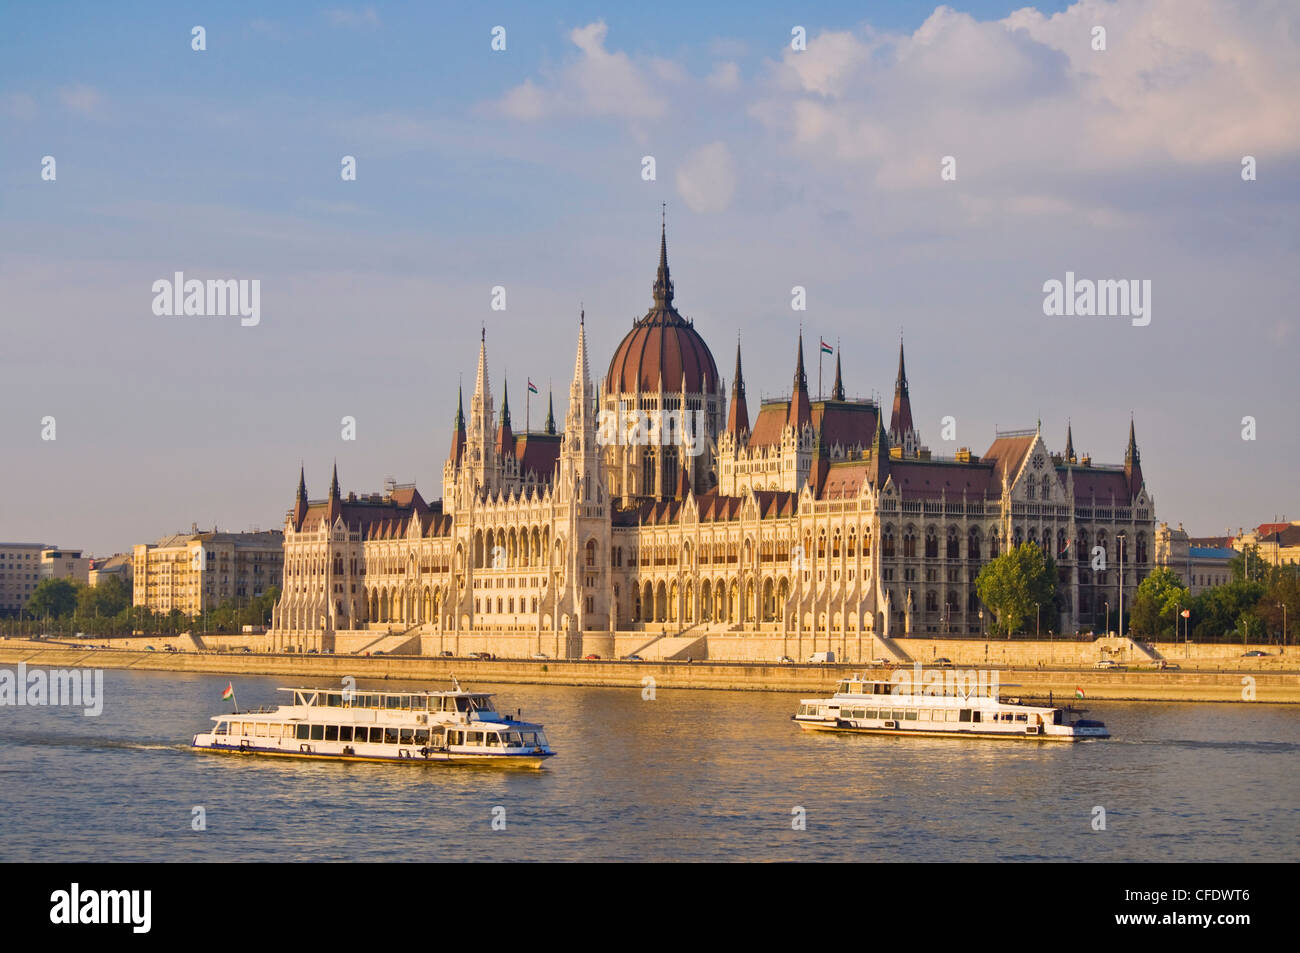 The Hungarian Parliament building, with cruise boats on the River Danube in the foreground, Budapest, Hungary Stock Photo